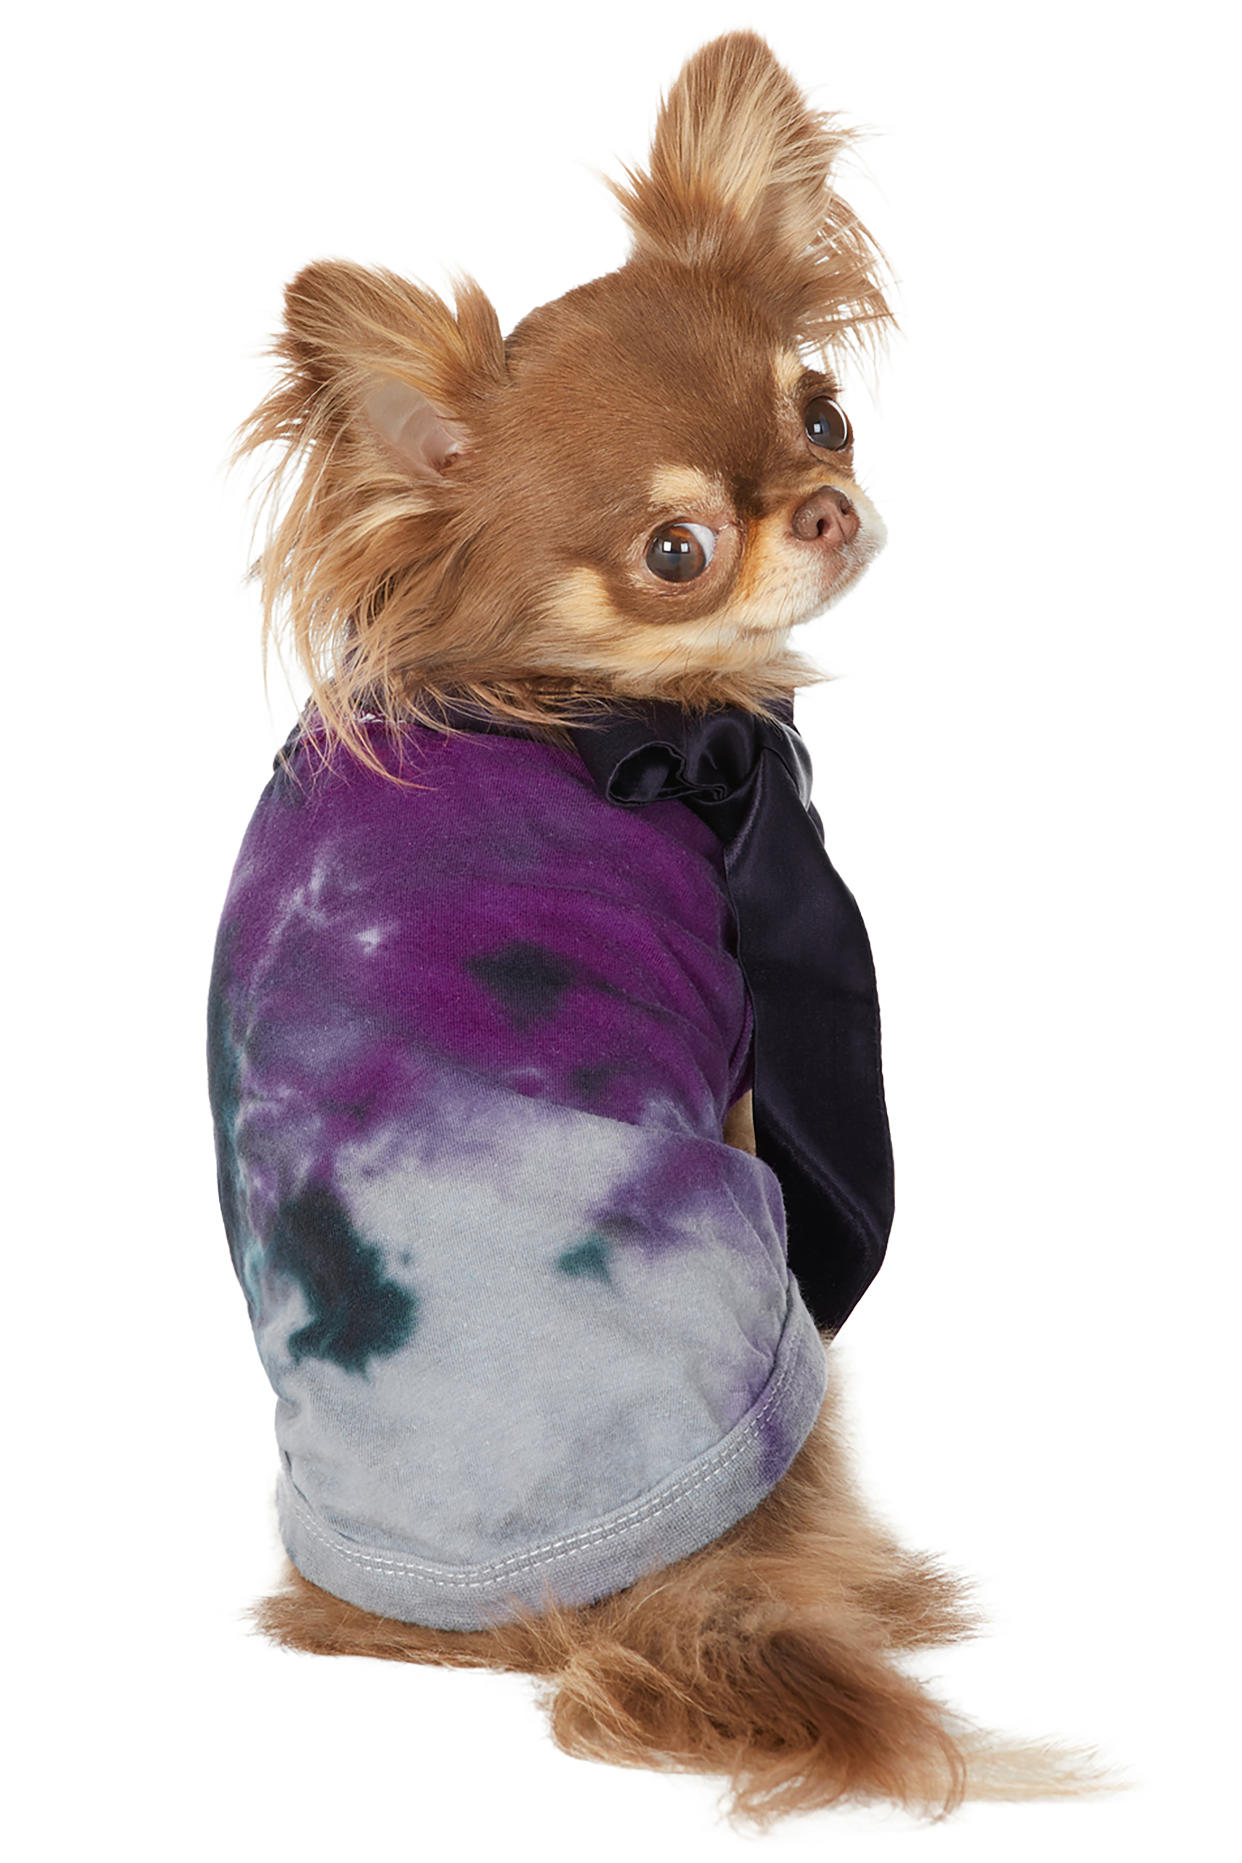 Ssense.com carries pet clothing such as this Collina Strada style. - Credit: Courtesy